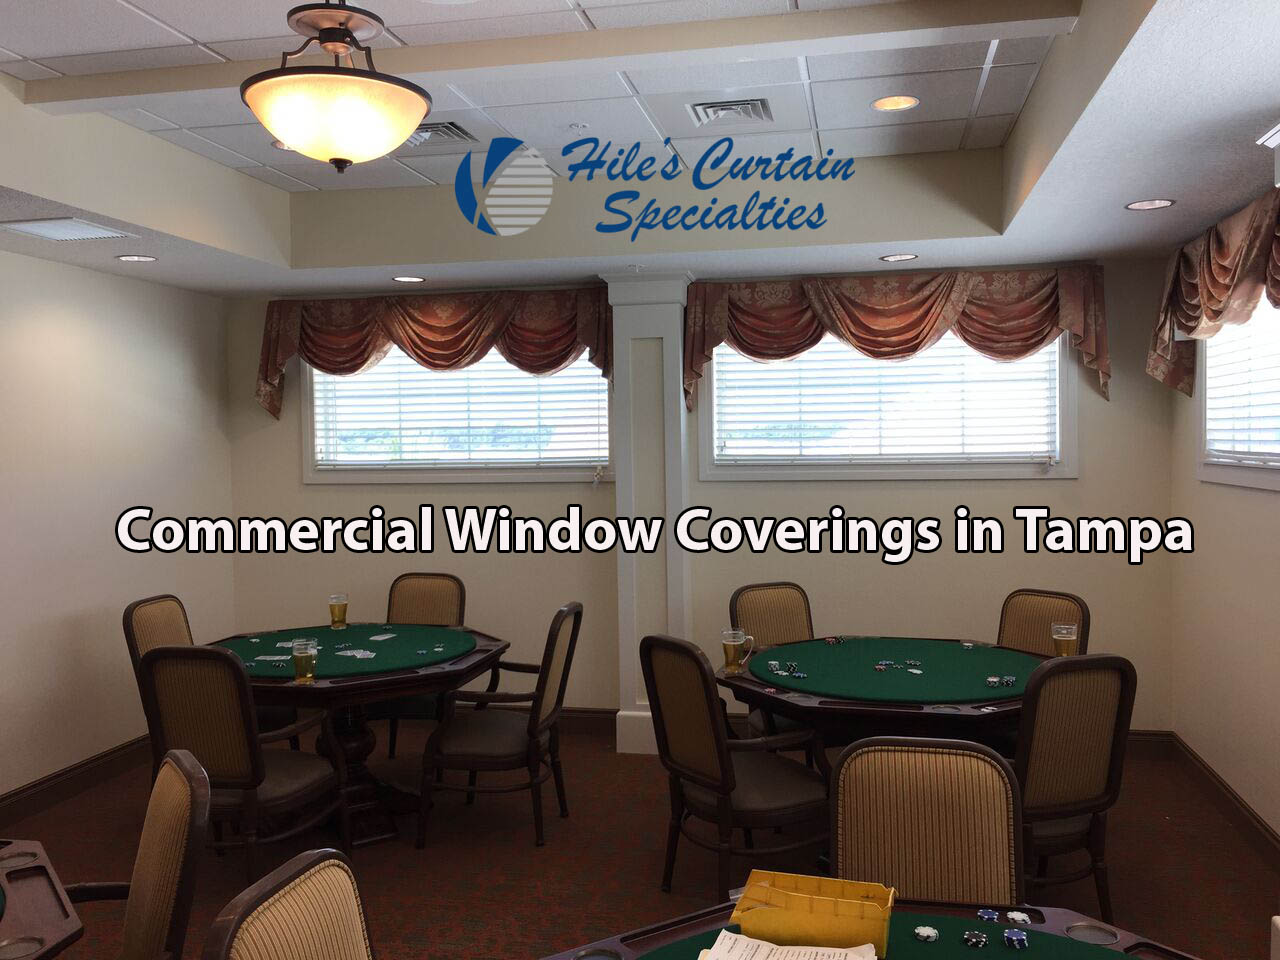 Commercial Window Coverings in Tampa Bay - Restaurant Curtains